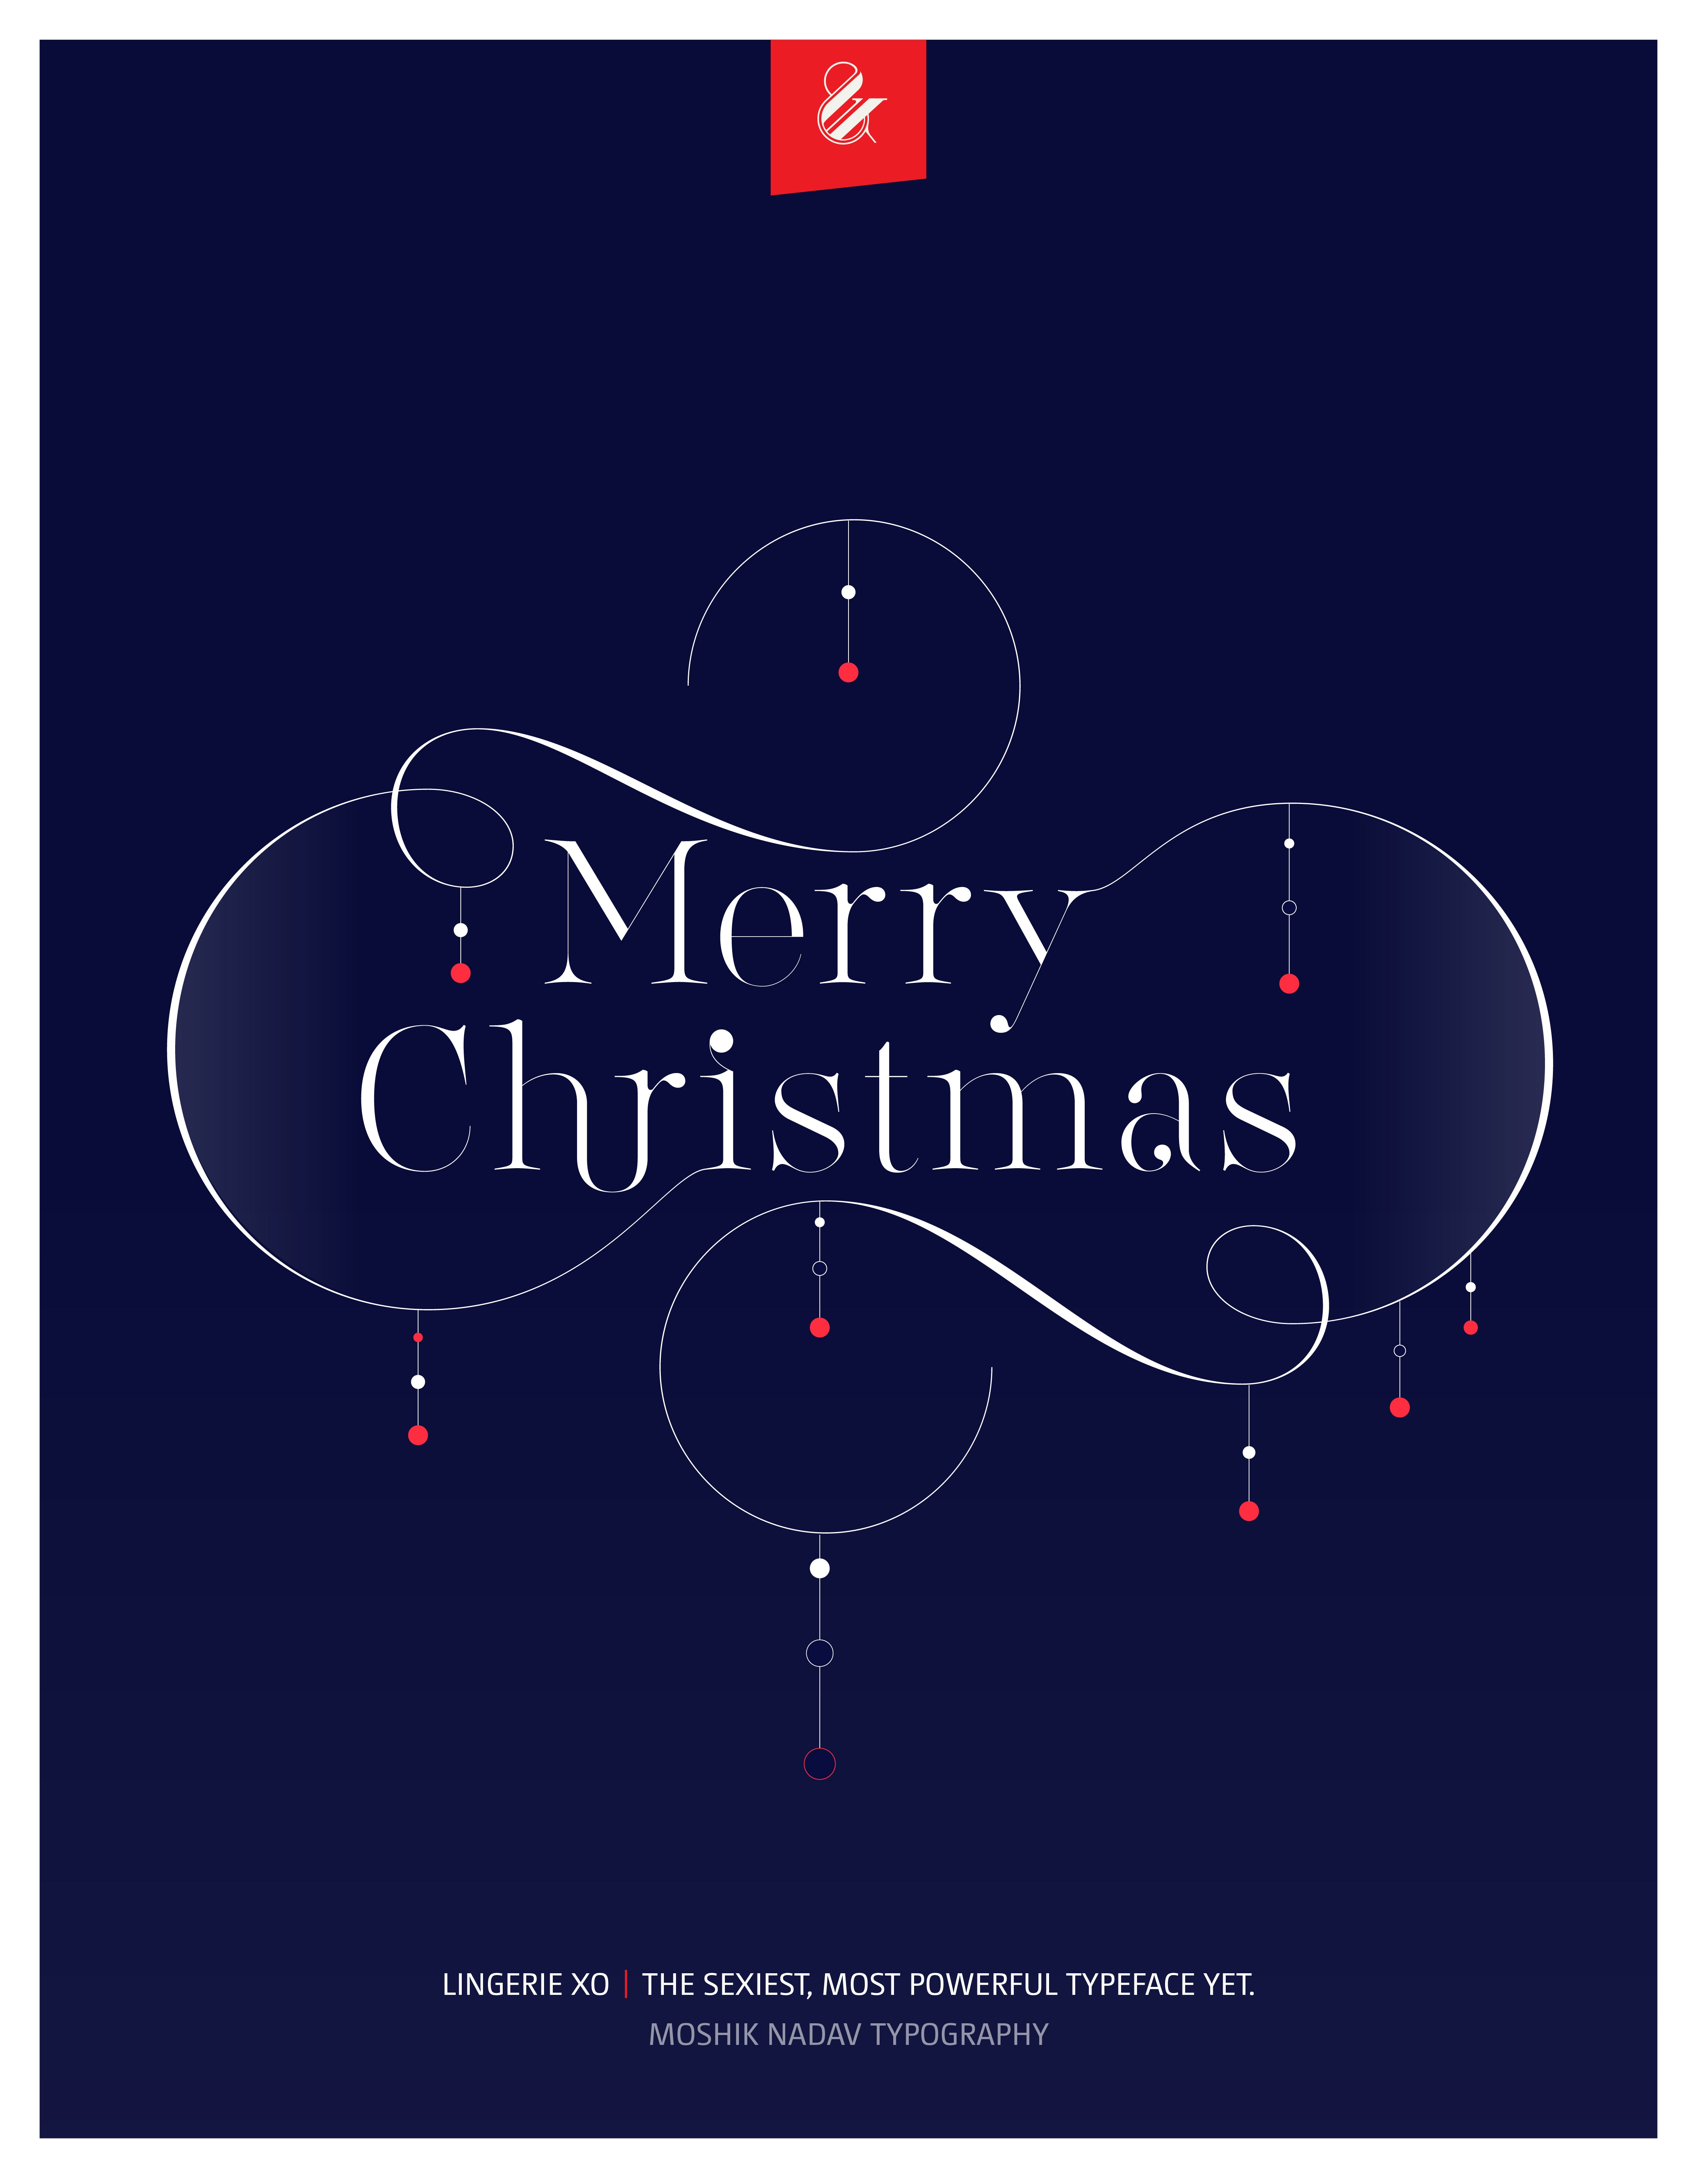 Merry Christmas poster - Designed with the sexy font Lingerie XO by Moshik Nadav Fashion Typography NYC